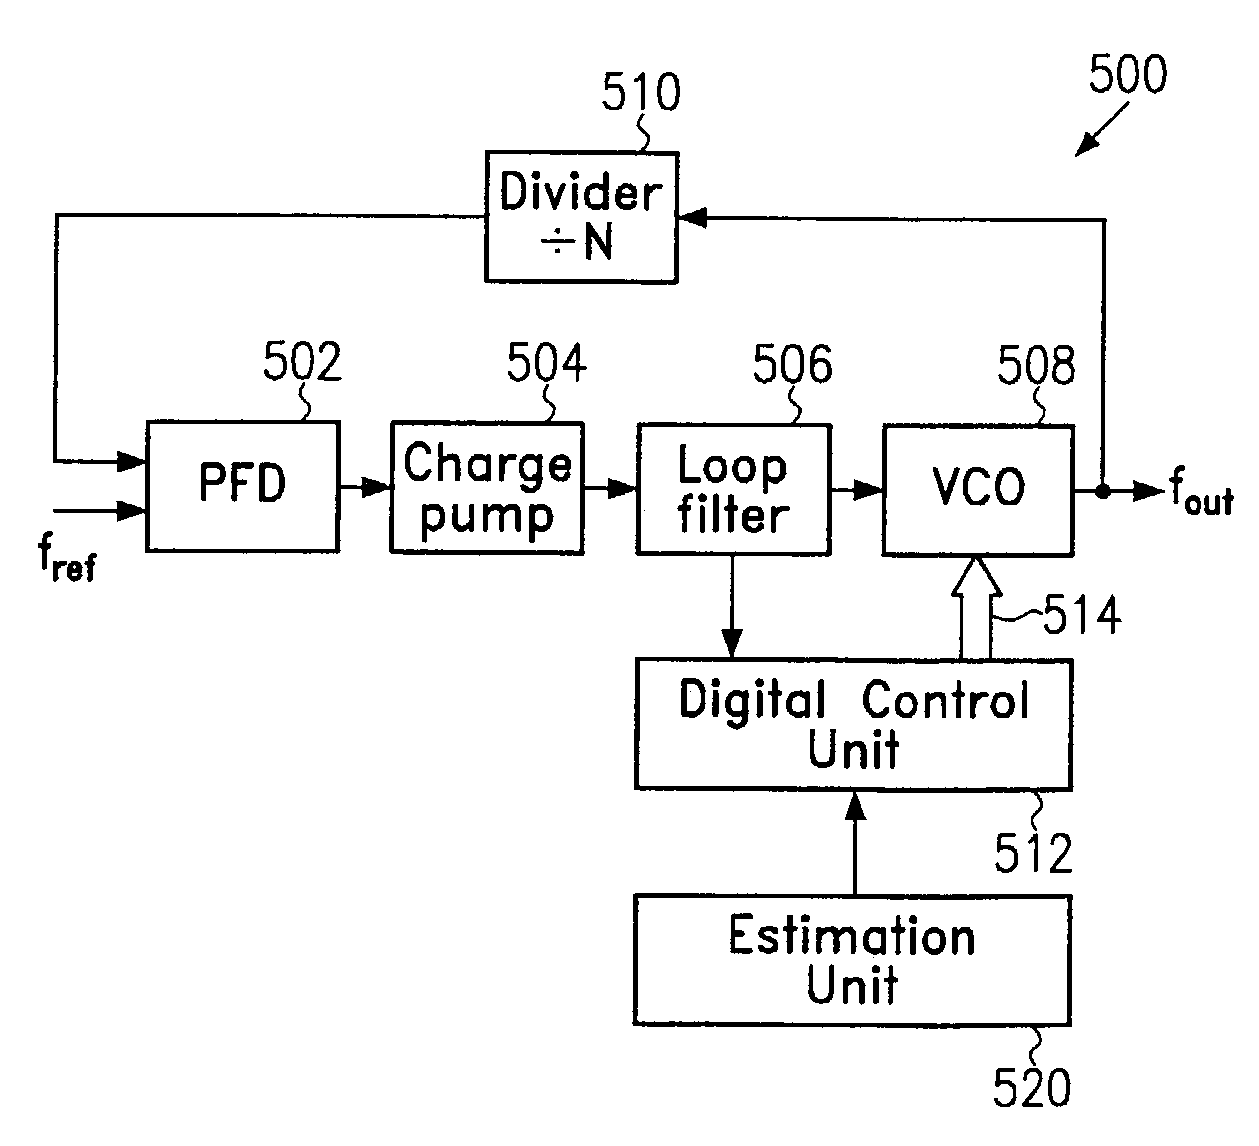 Automatic center frequency tuning of a voltage controlled oscillator